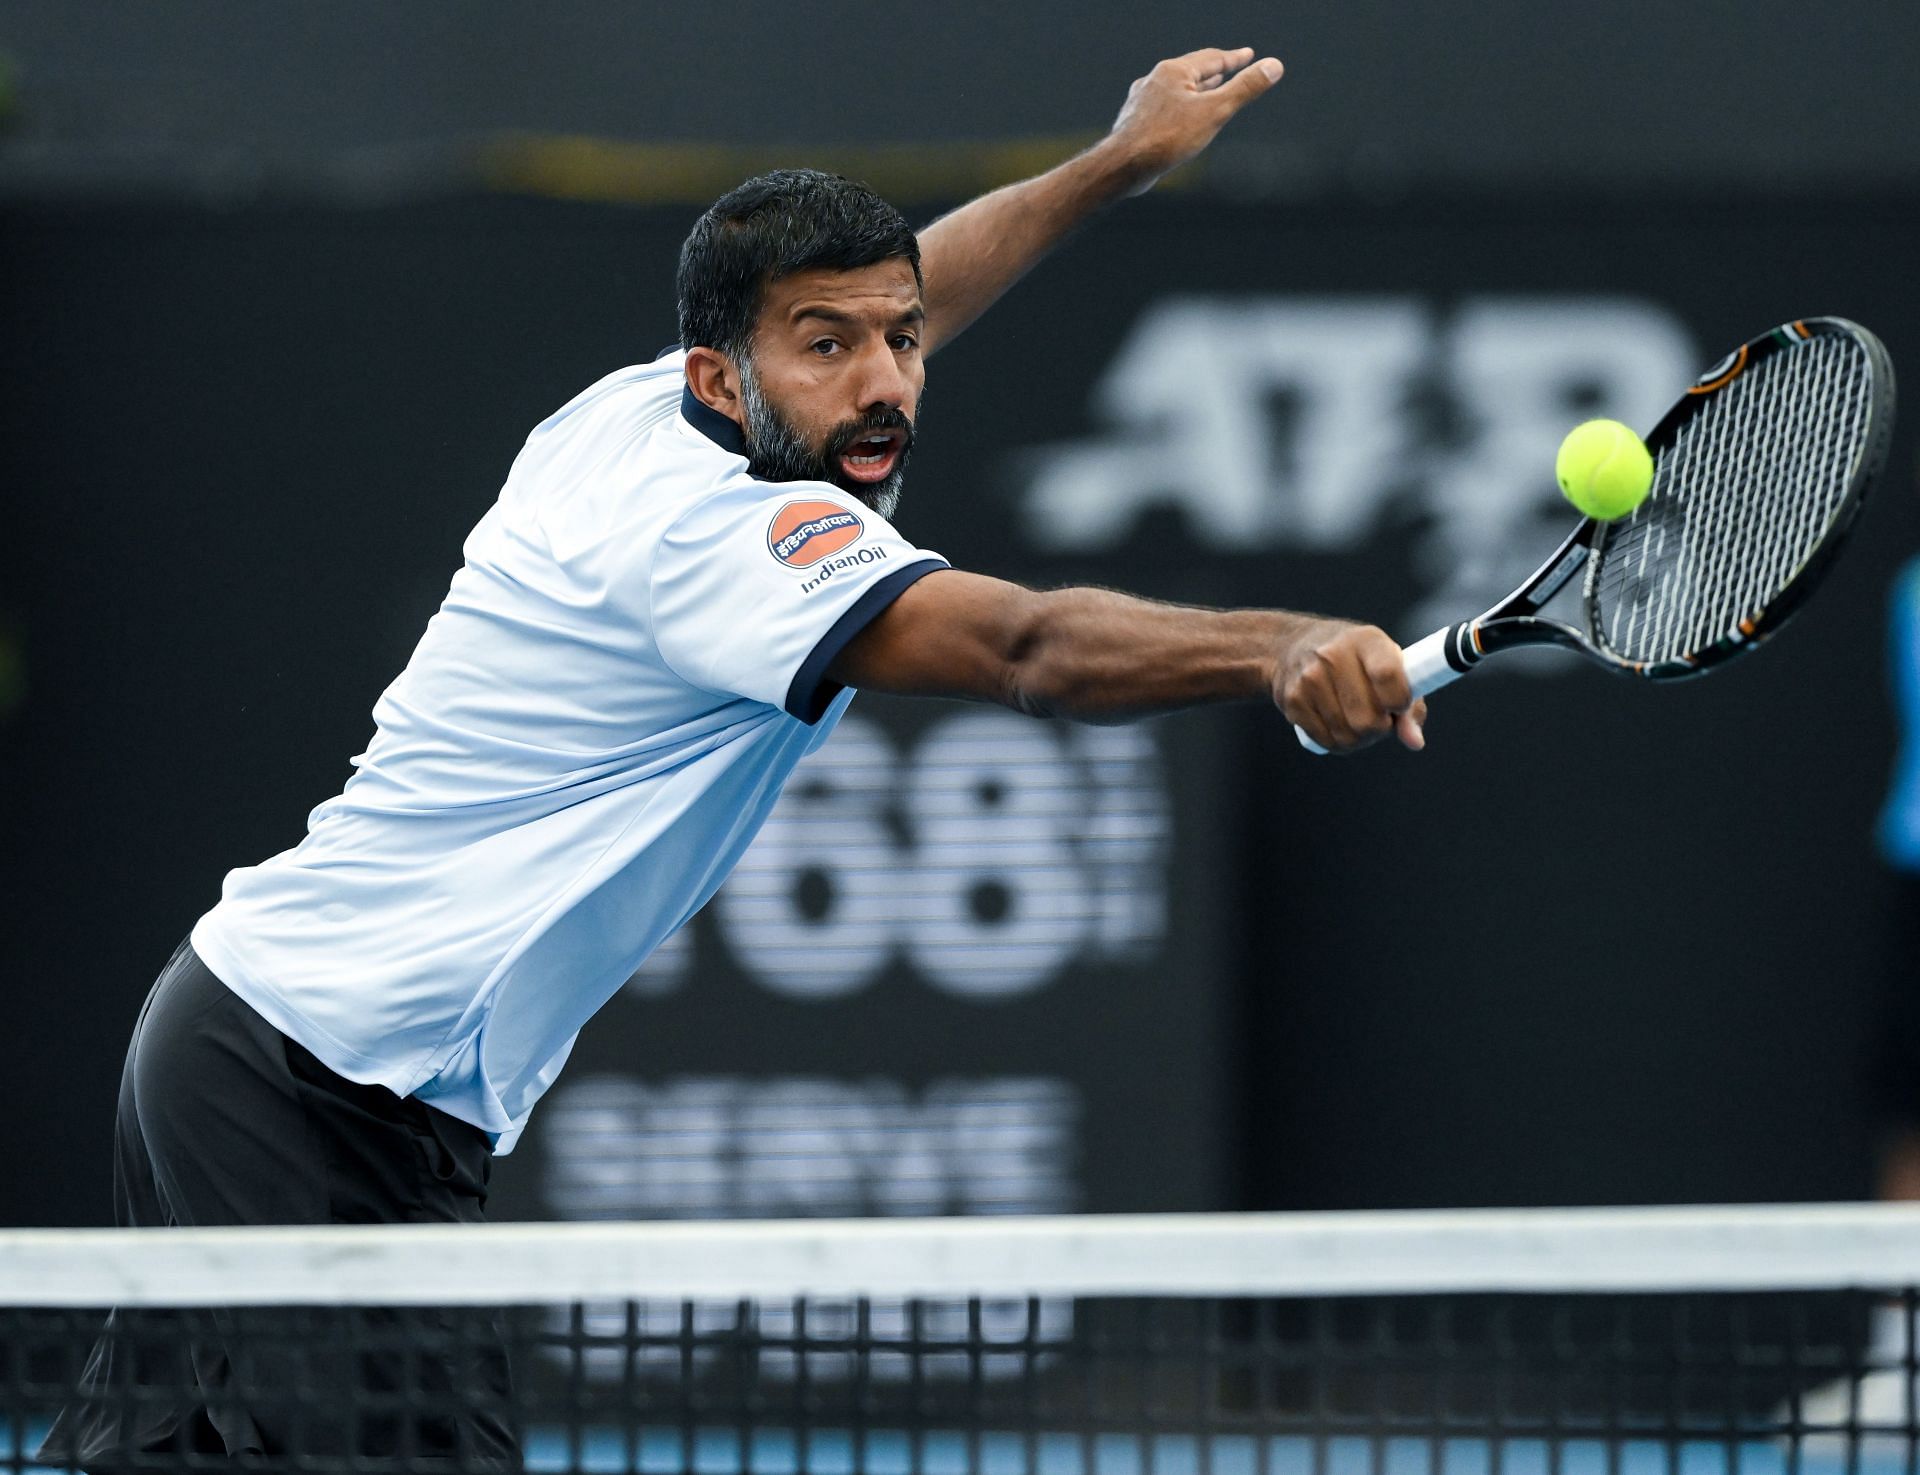 Who is Rohan Bopanna's partner in men's doubles at the Paris Olympics 2024?